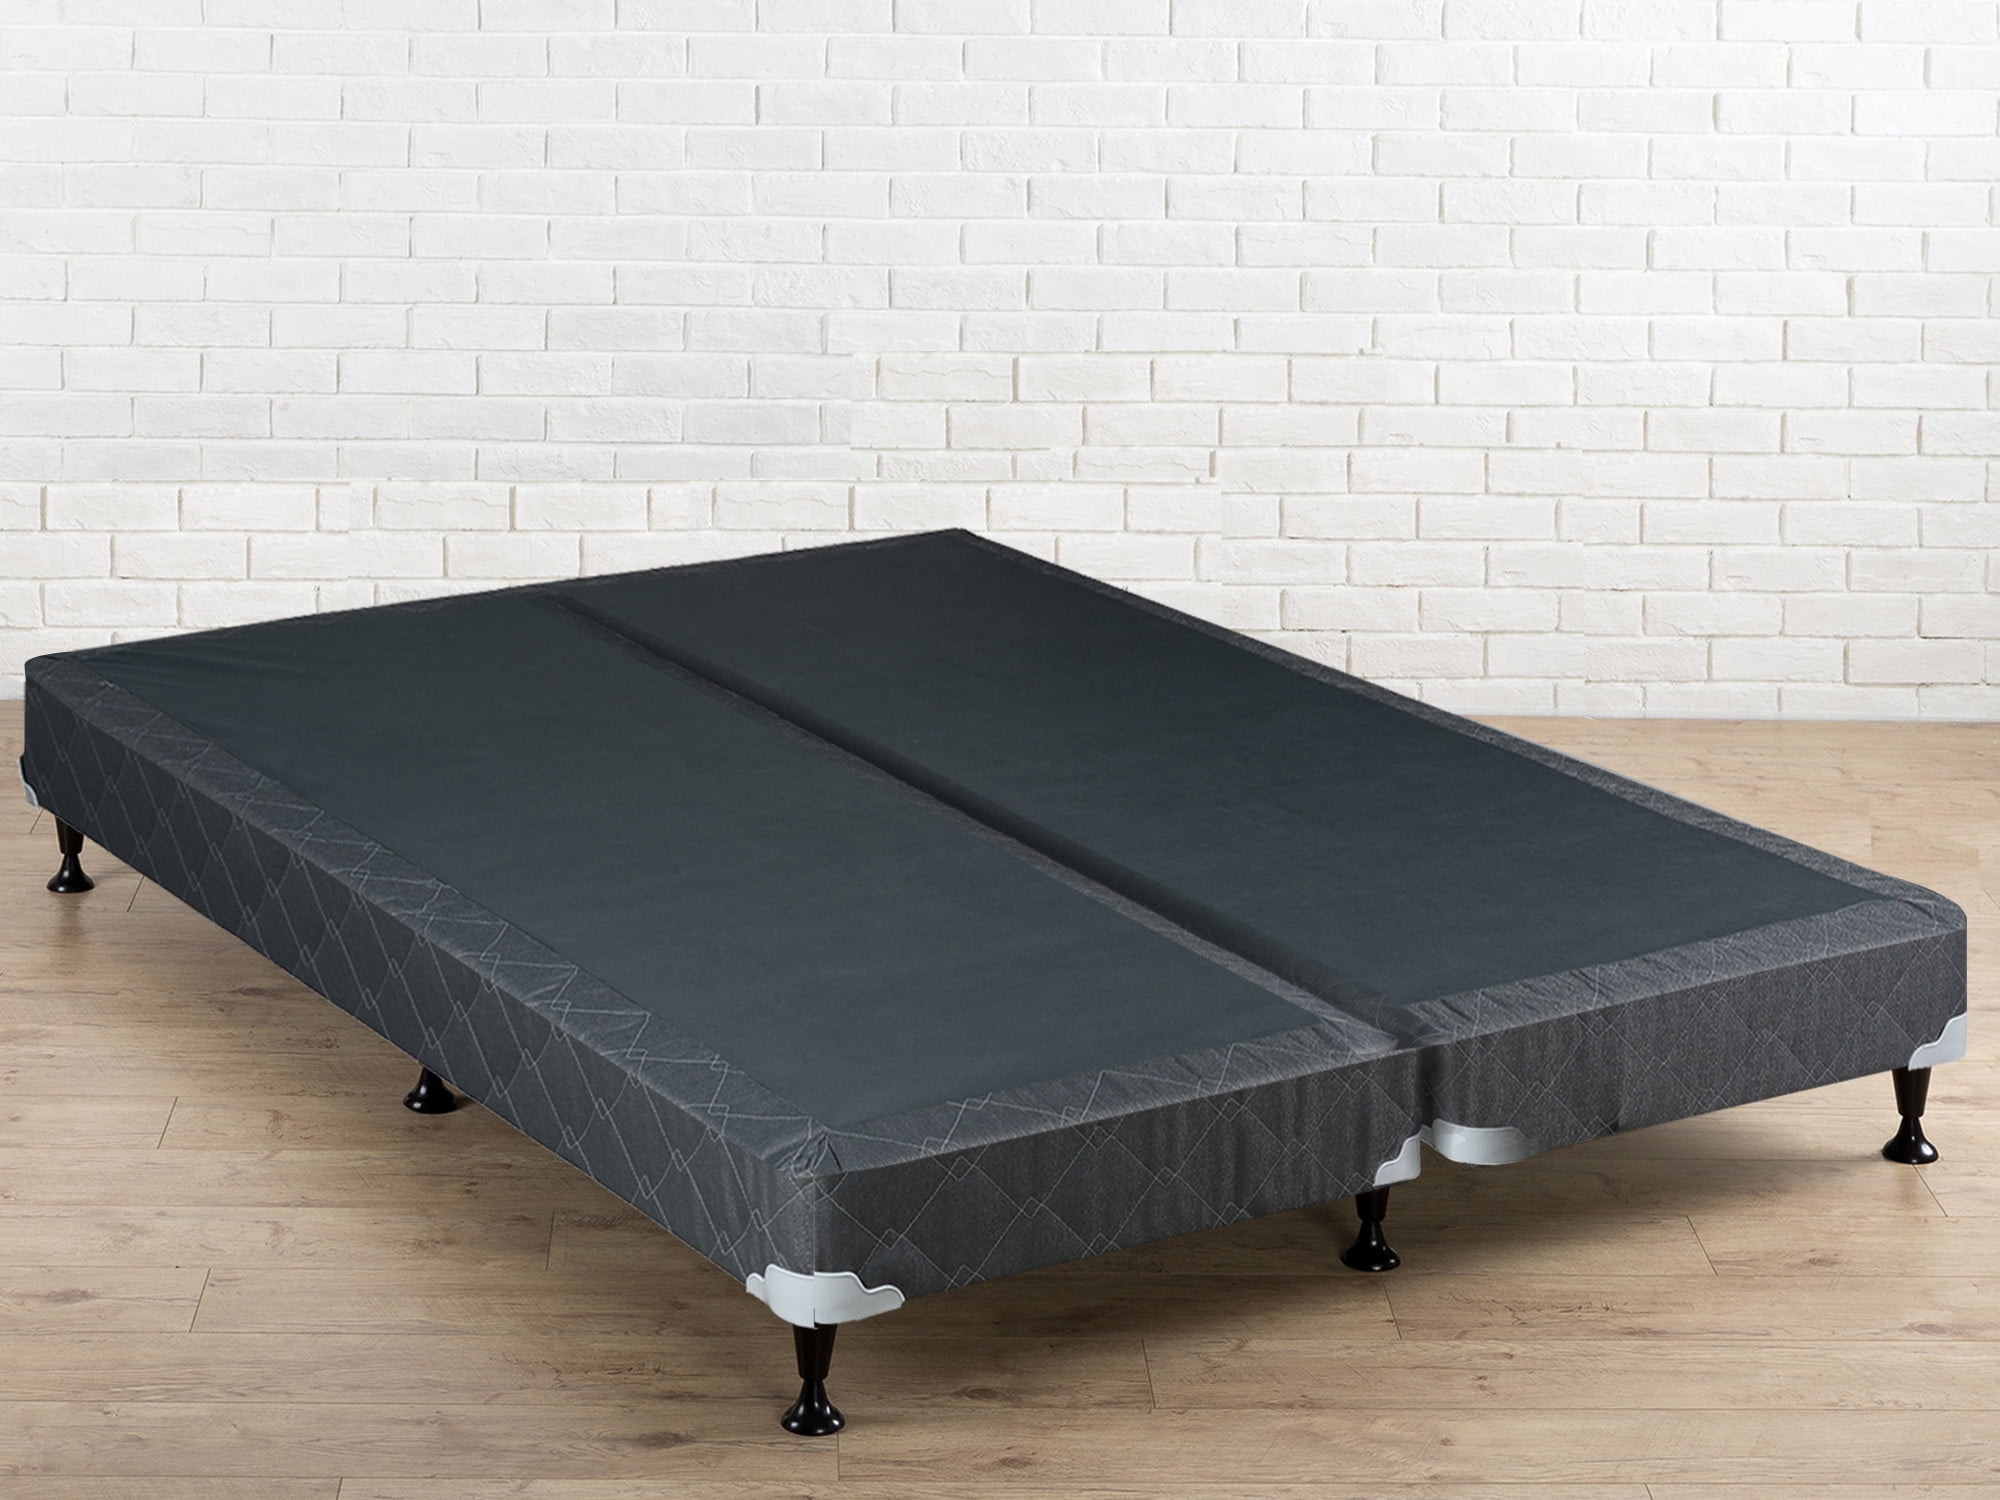 Full X-Large Spinal Solution 4 Fully Assembled Split Box Spring for Mattress